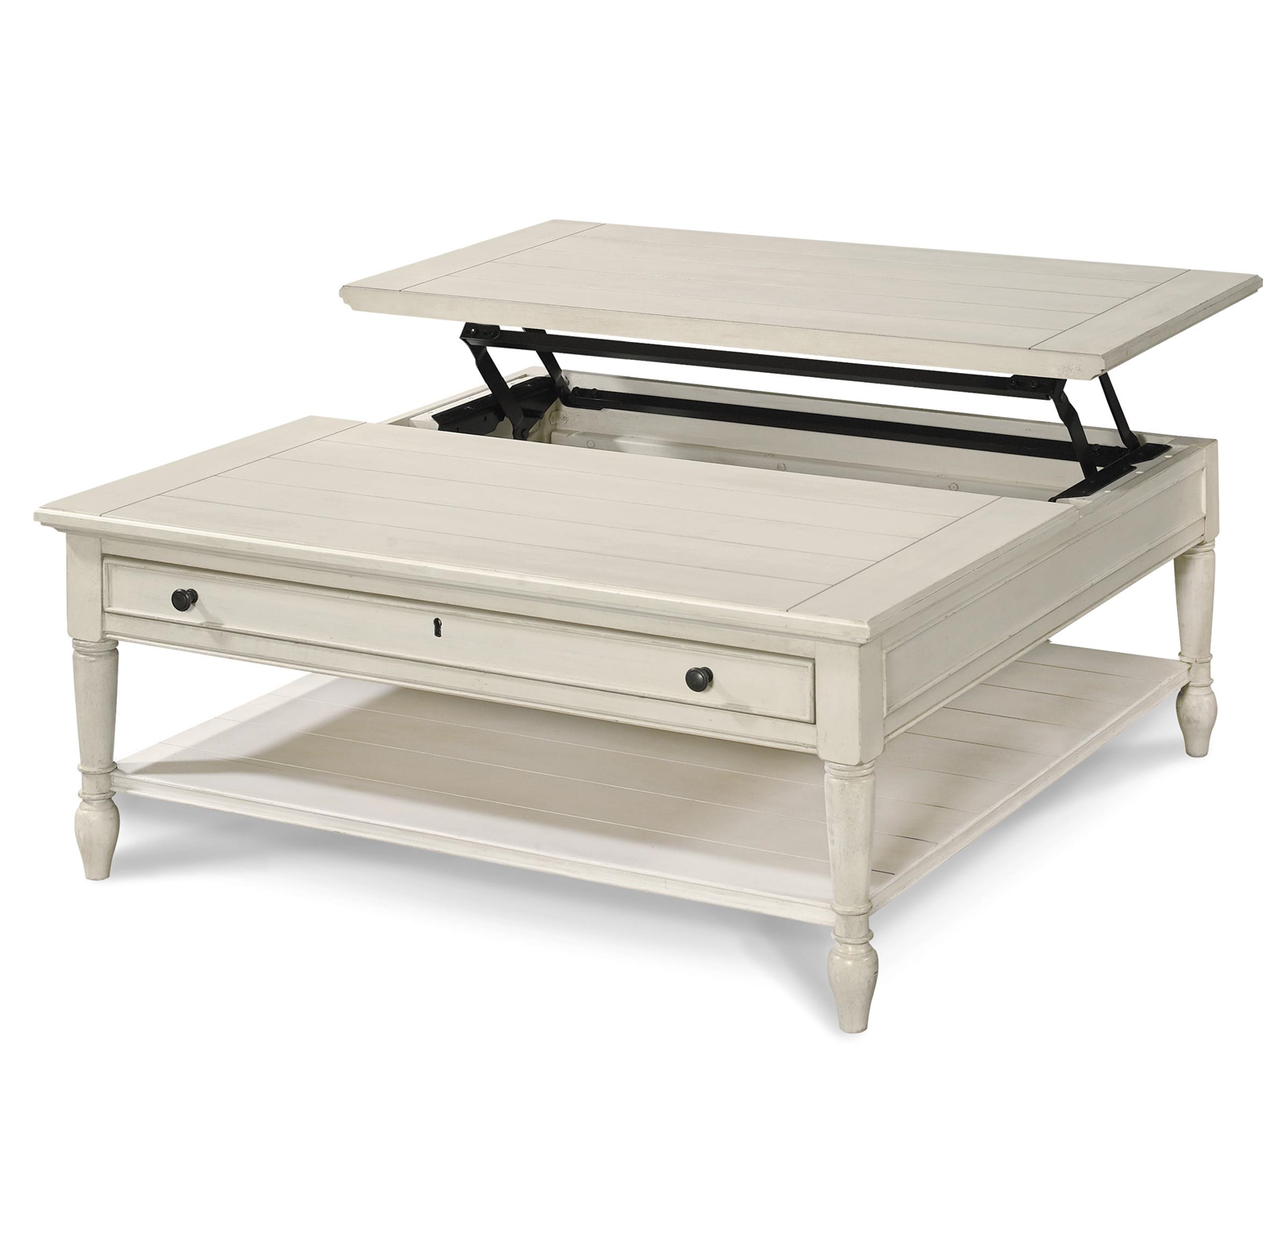 Country Chic White Wood Square Coffee Table With Lift Top | Zin Home Pertaining To Wood Lift Top Coffee Tables (Gallery 12 of 20)